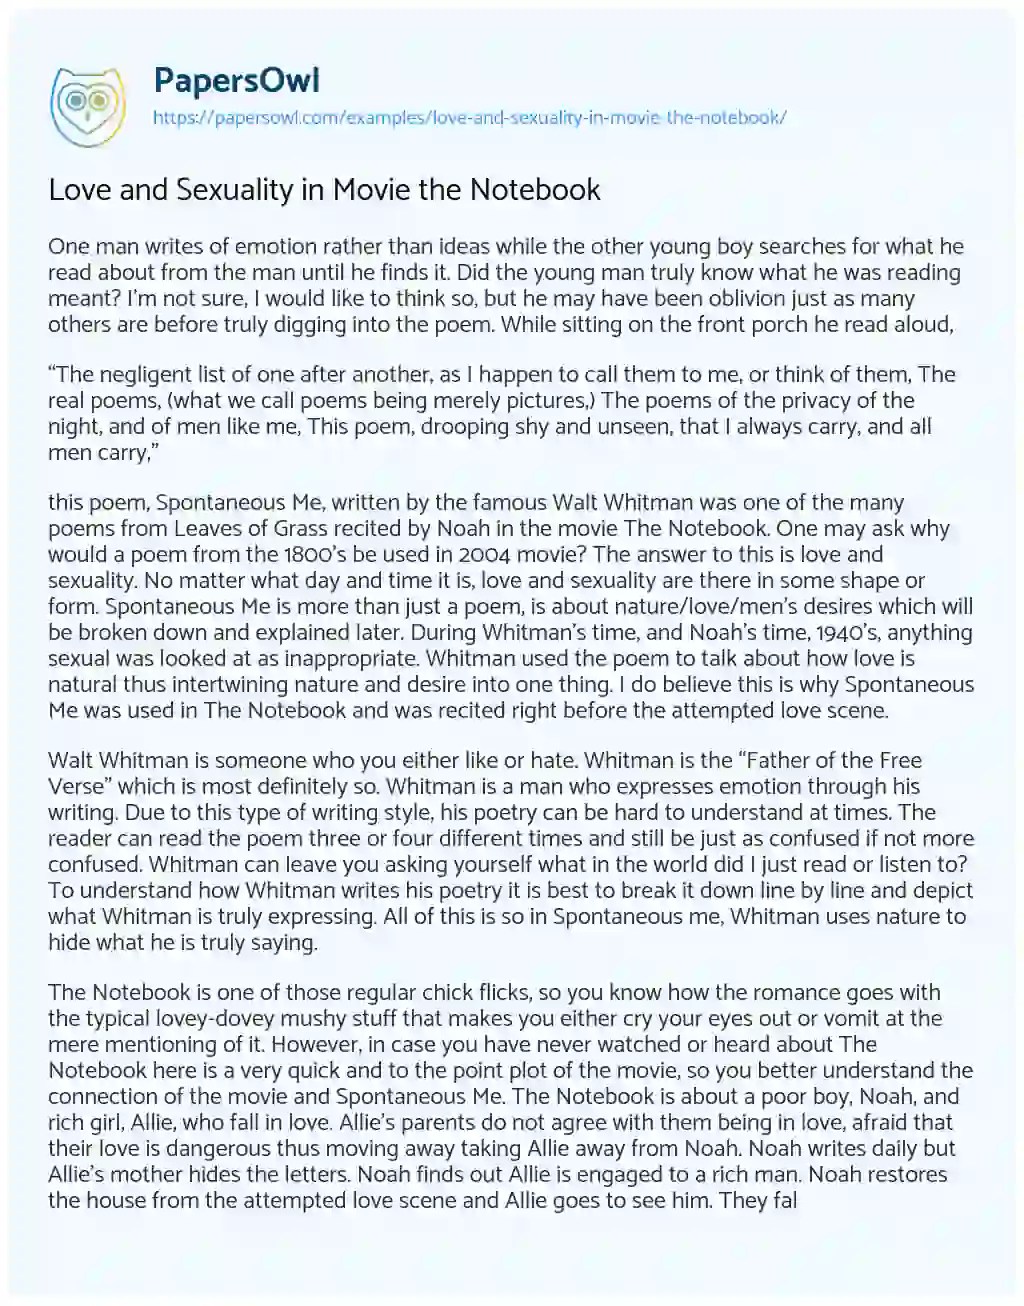 Love and Sexuality in Movie the Notebook essay